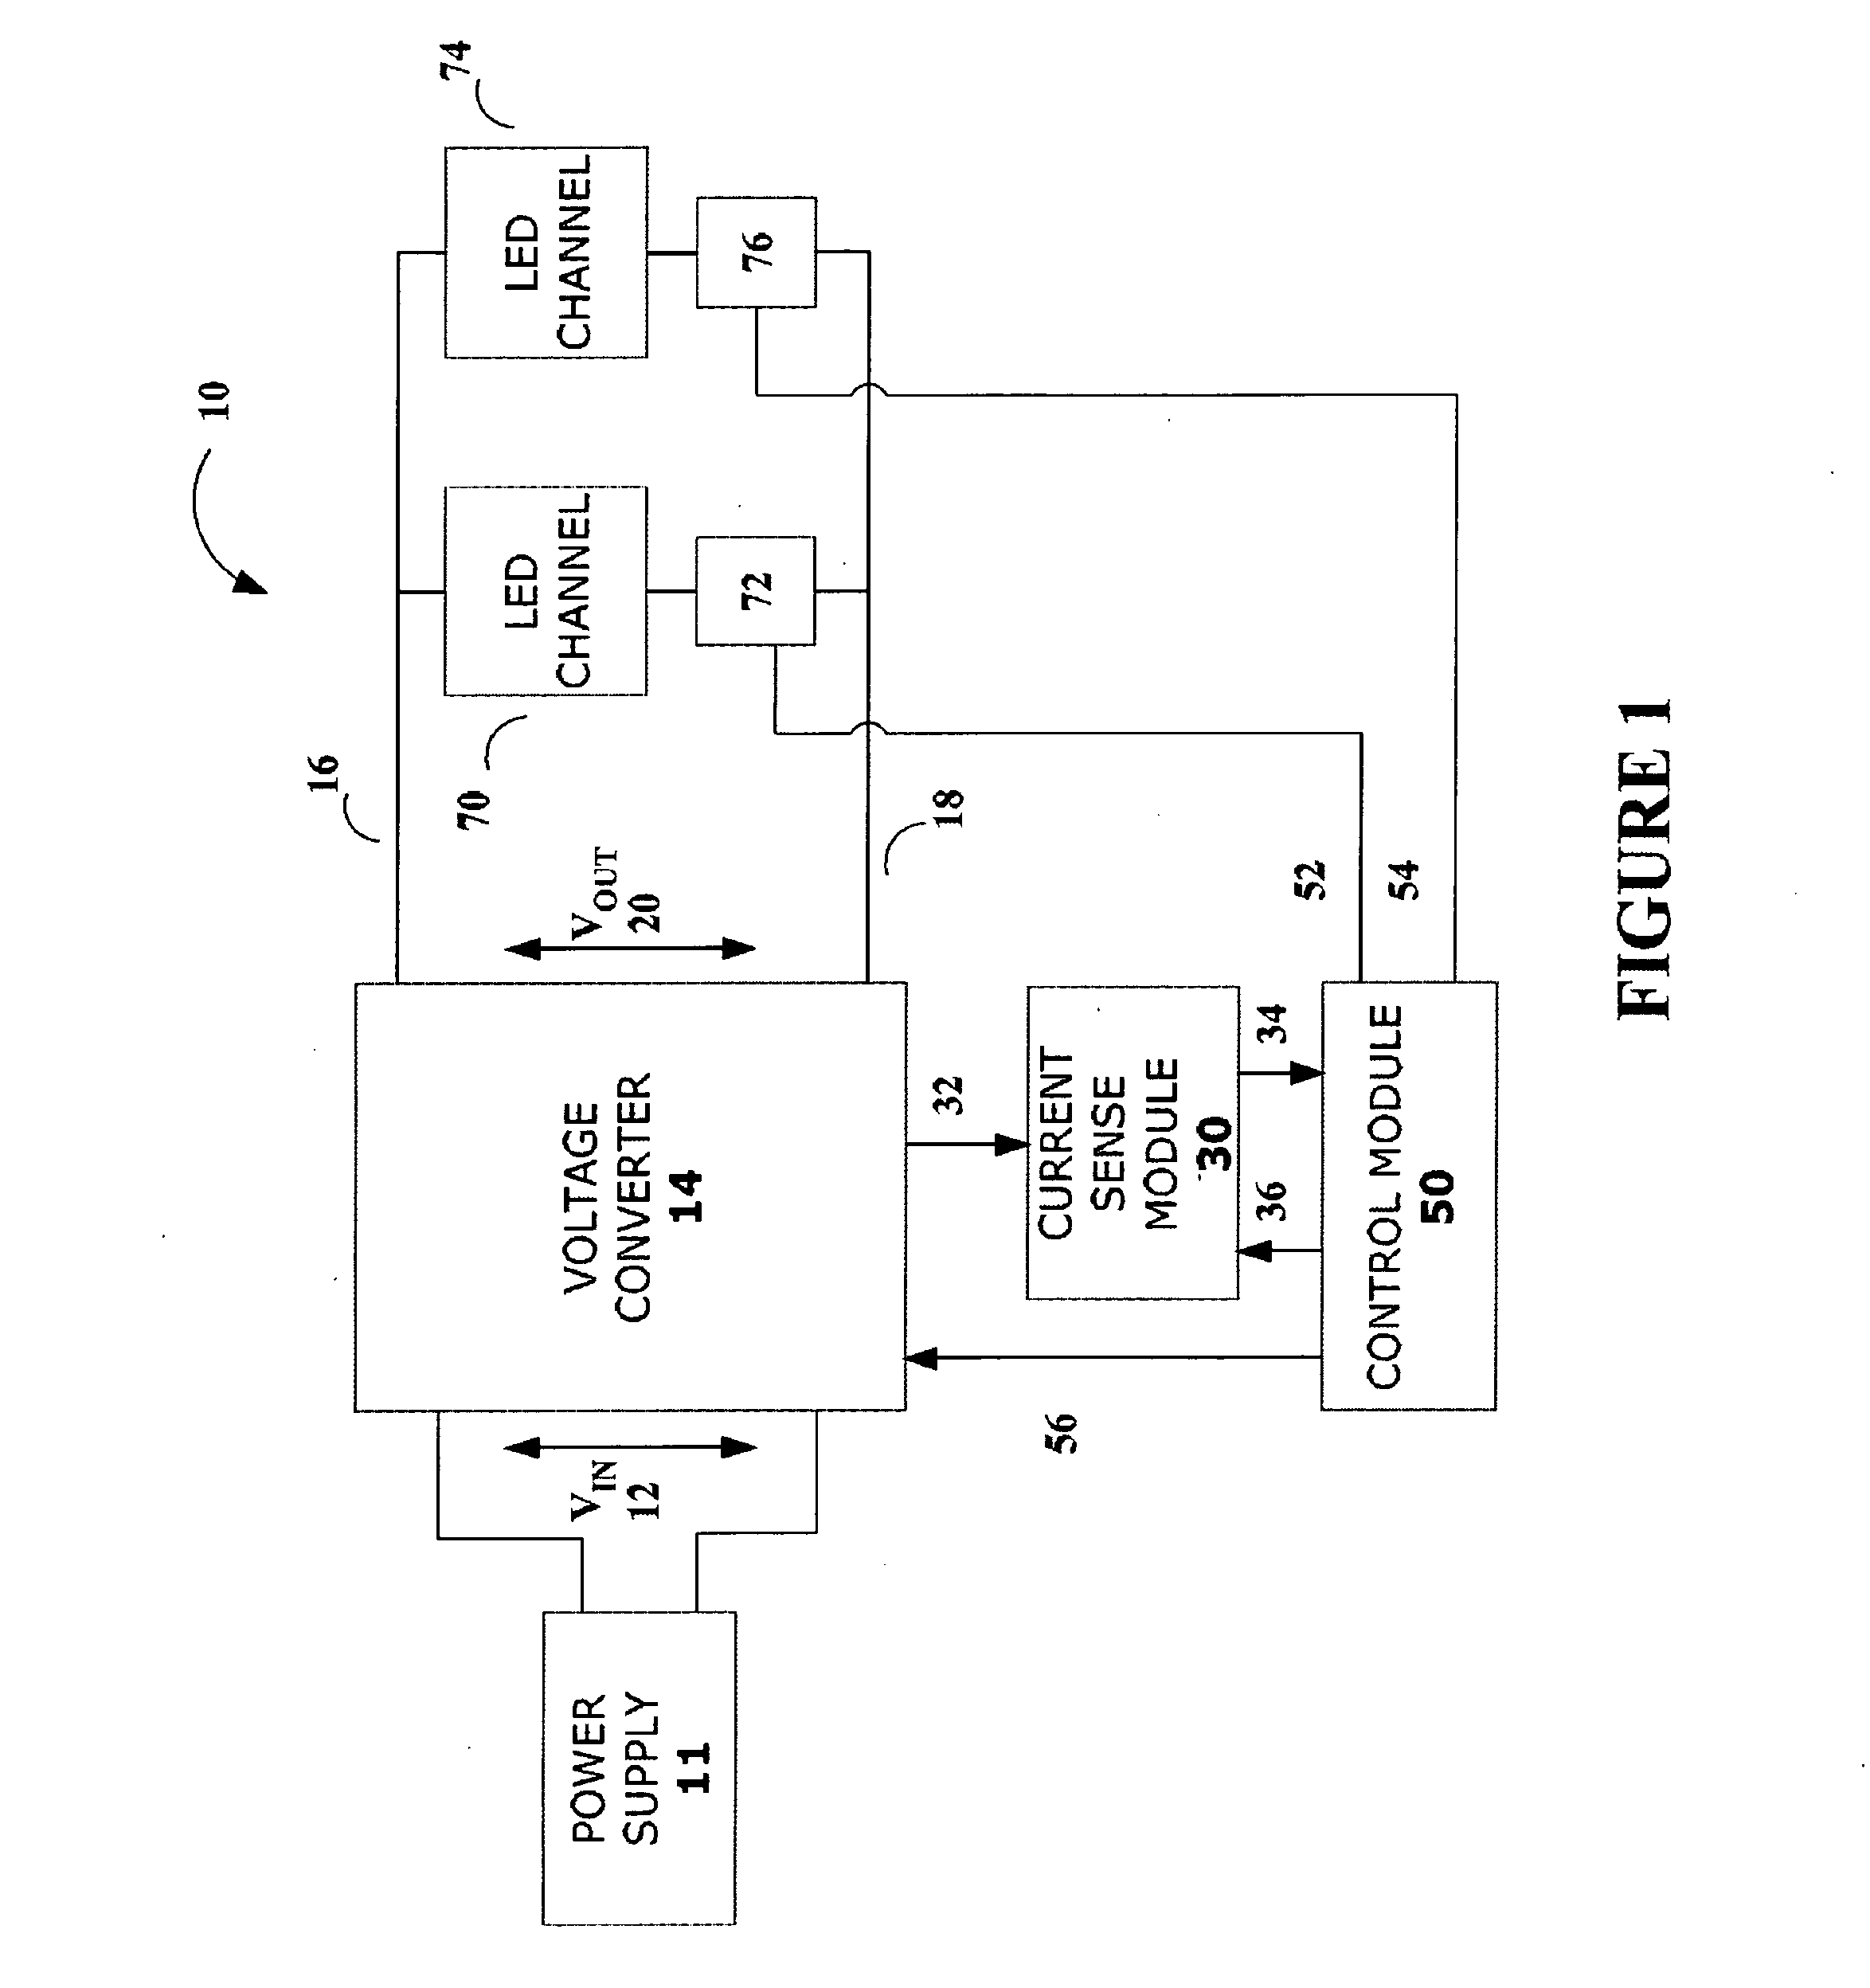 Control apparatus incorporating a voltage converter for controlling lighting apparatus